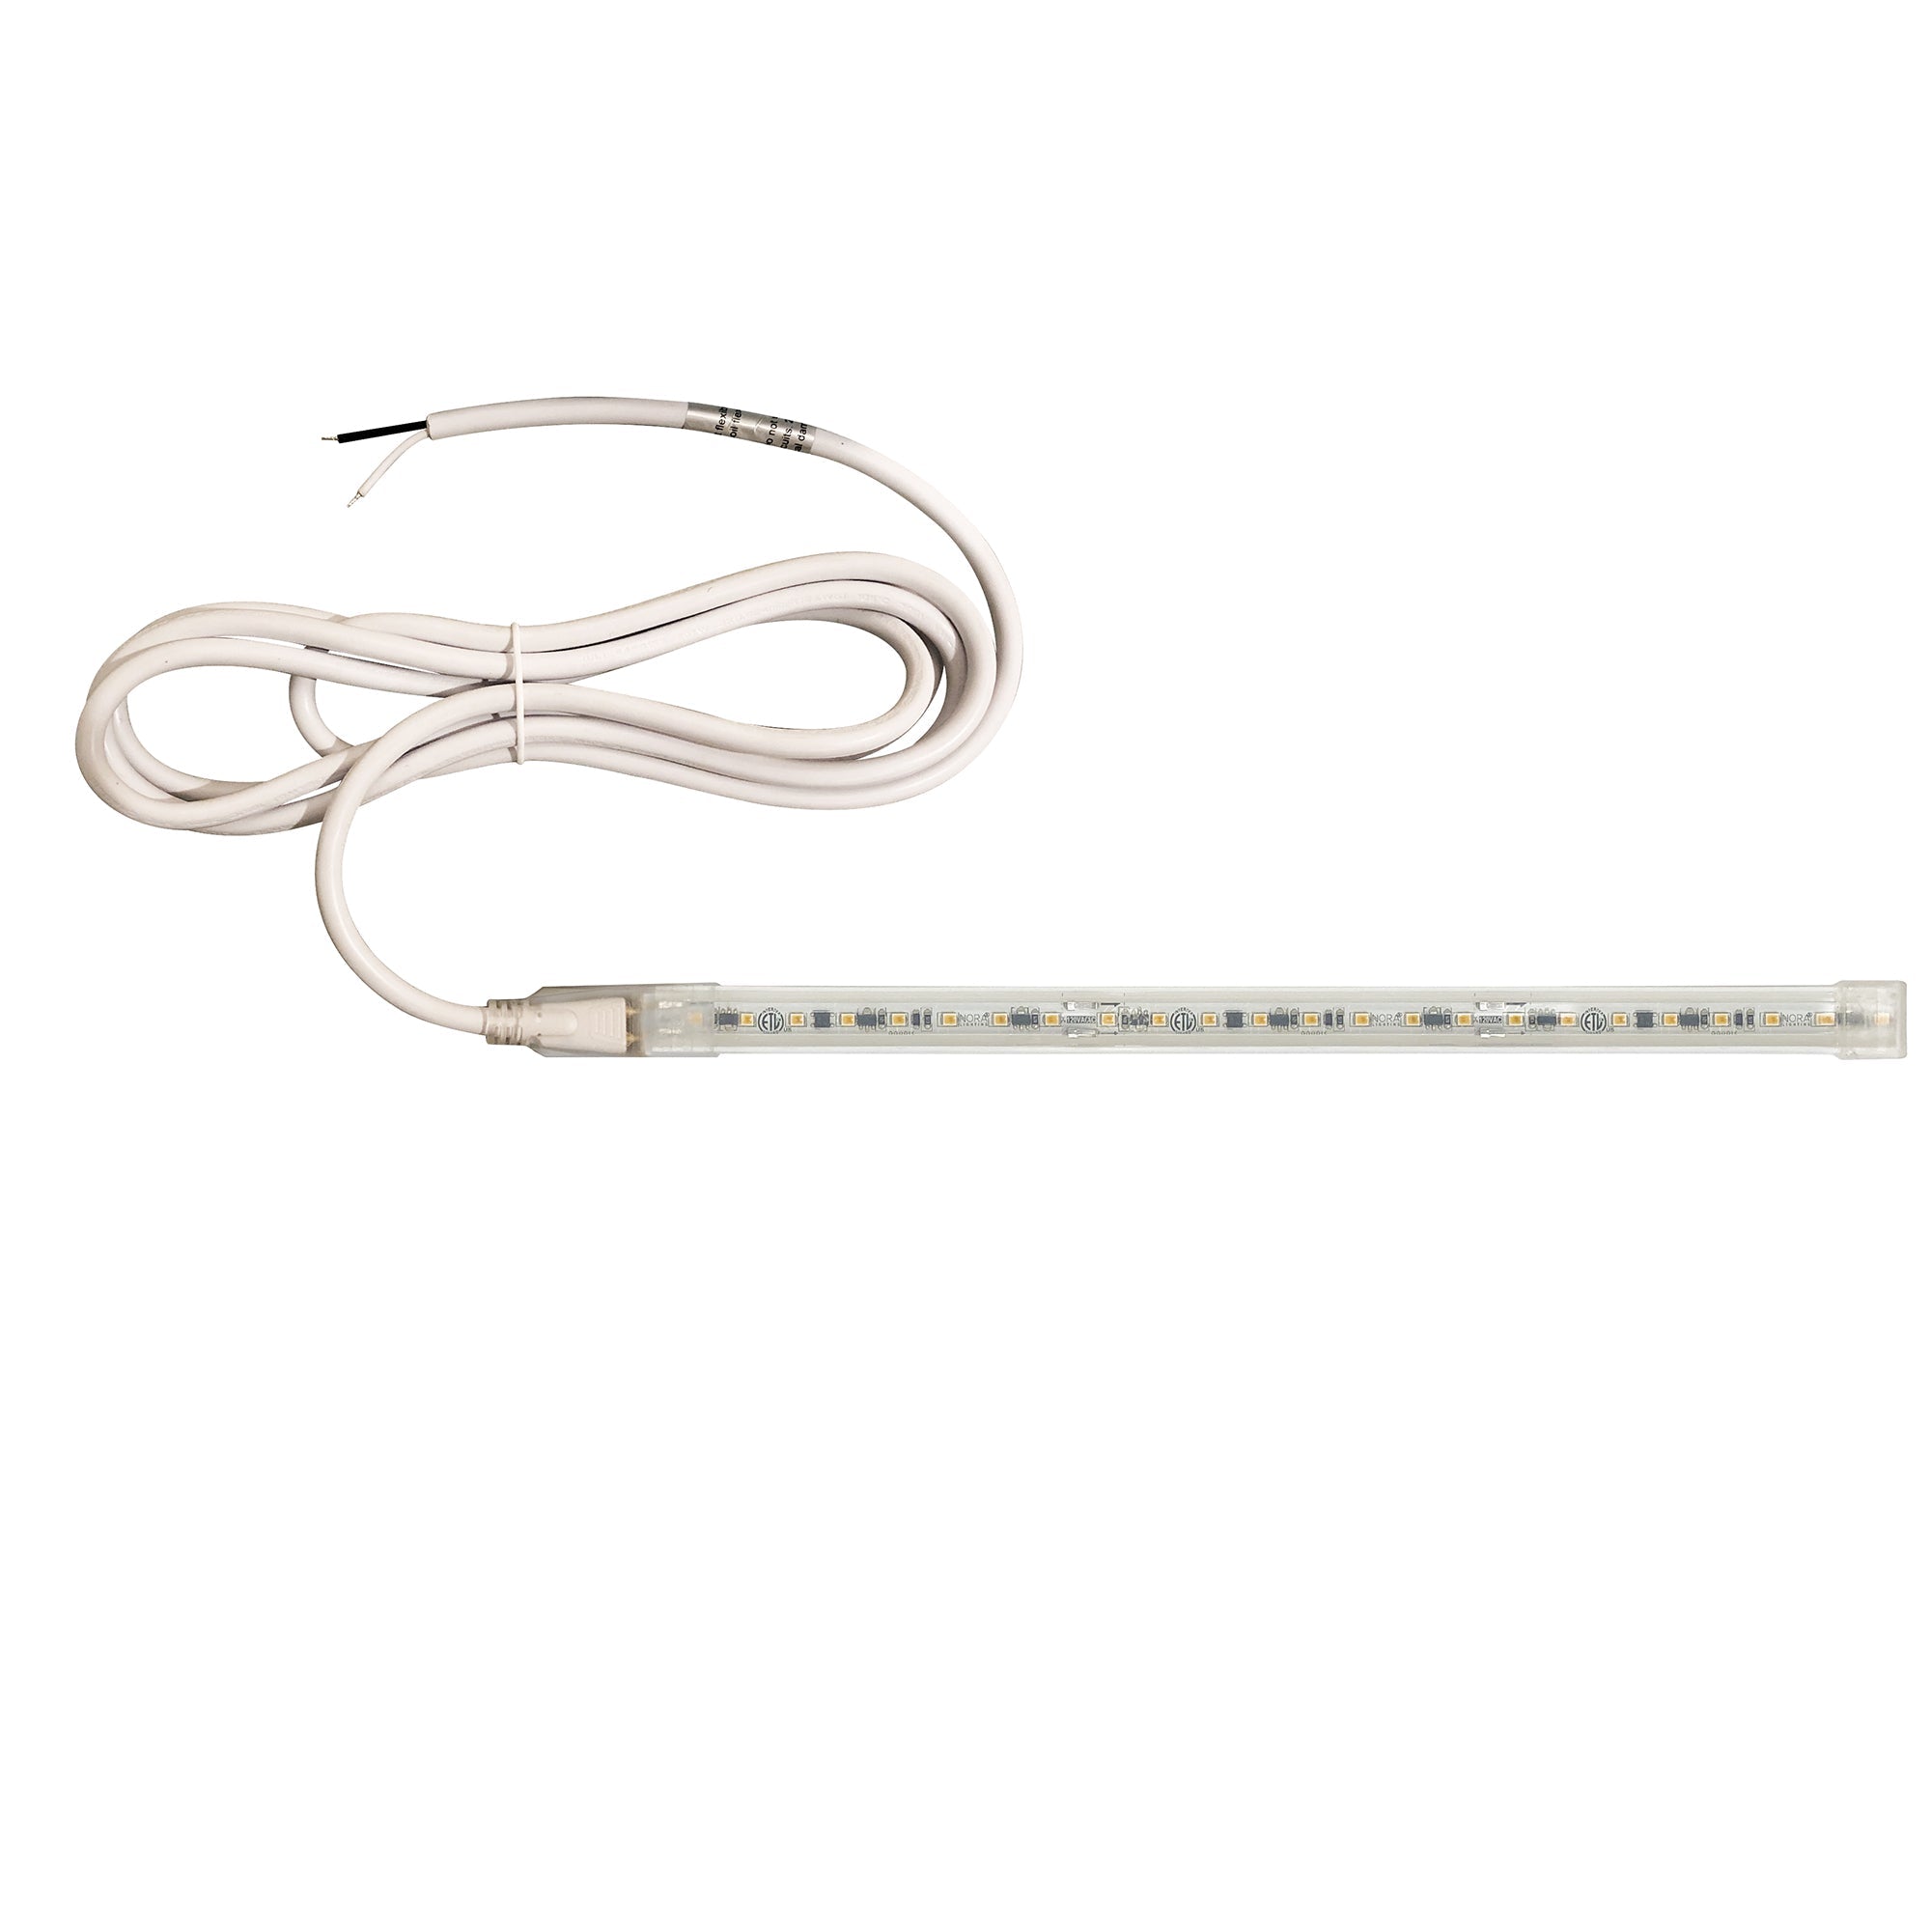 Nora Lighting NUTP13-W50-12-940/HW - Accent / Undercabinet - Custom Cut 50-ft 120V Continuous LED Tape Light, 330lm / 3.6W per foot, 4000K, w/ Mounting Clips and 8' Hardwired Power Cord